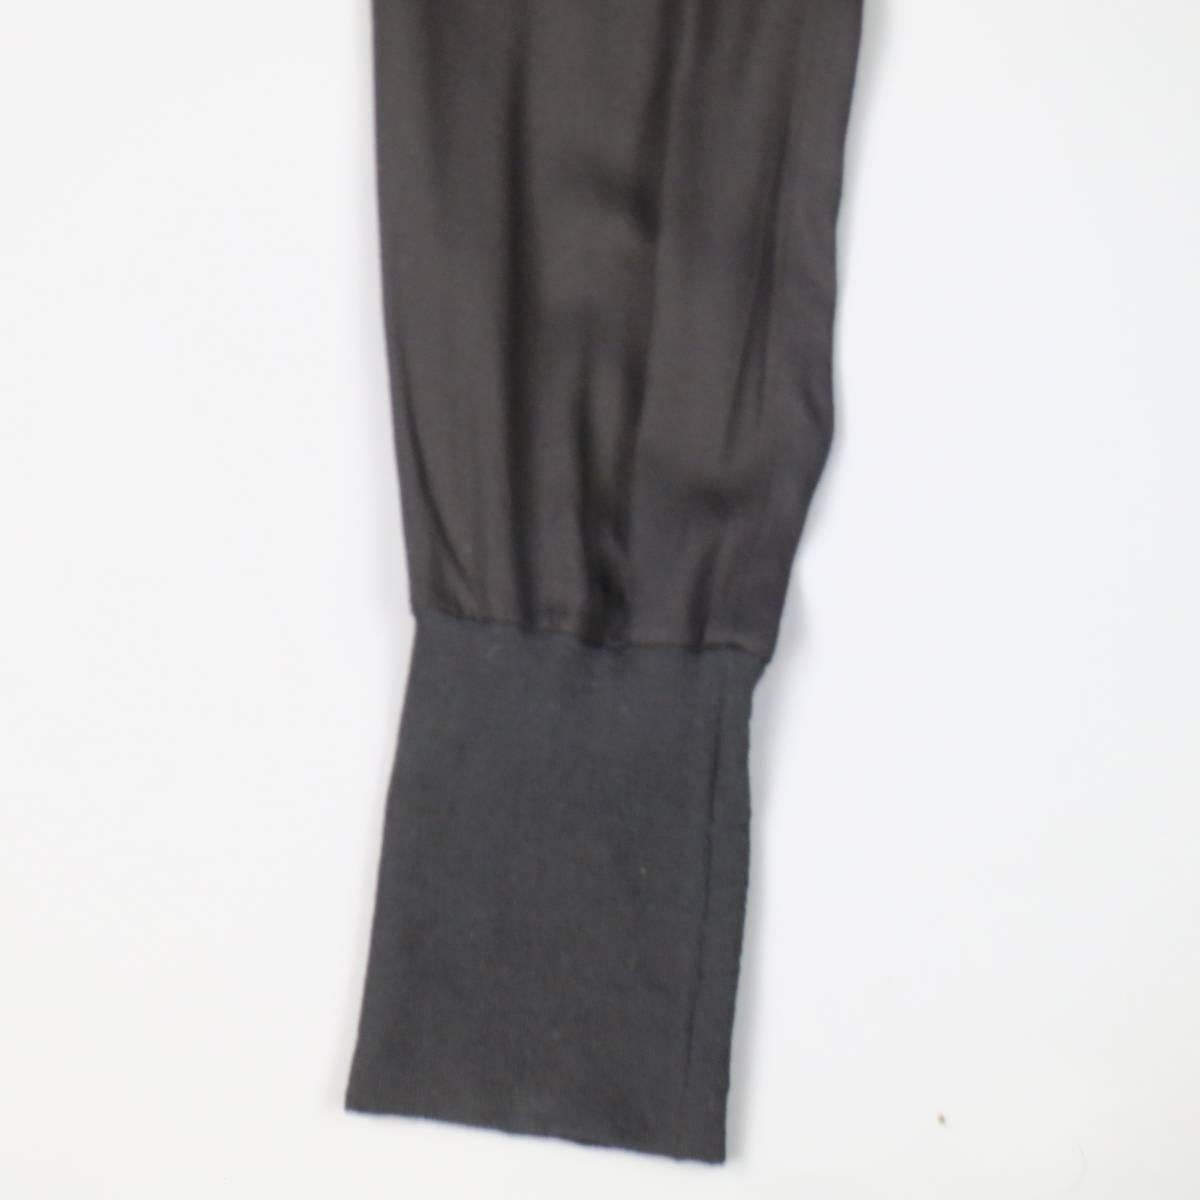 ANN DEMEULEMEESTER trousers ia light weight rayon jersey featuring slit pockets, mock fly, thick elastic cuffs, and a thick elastic silk satin waistband. Made in Portugal.
 
Excellent Pre-Owned Condition.
Marked: 36
 
Measurements:
 
Waist: 24